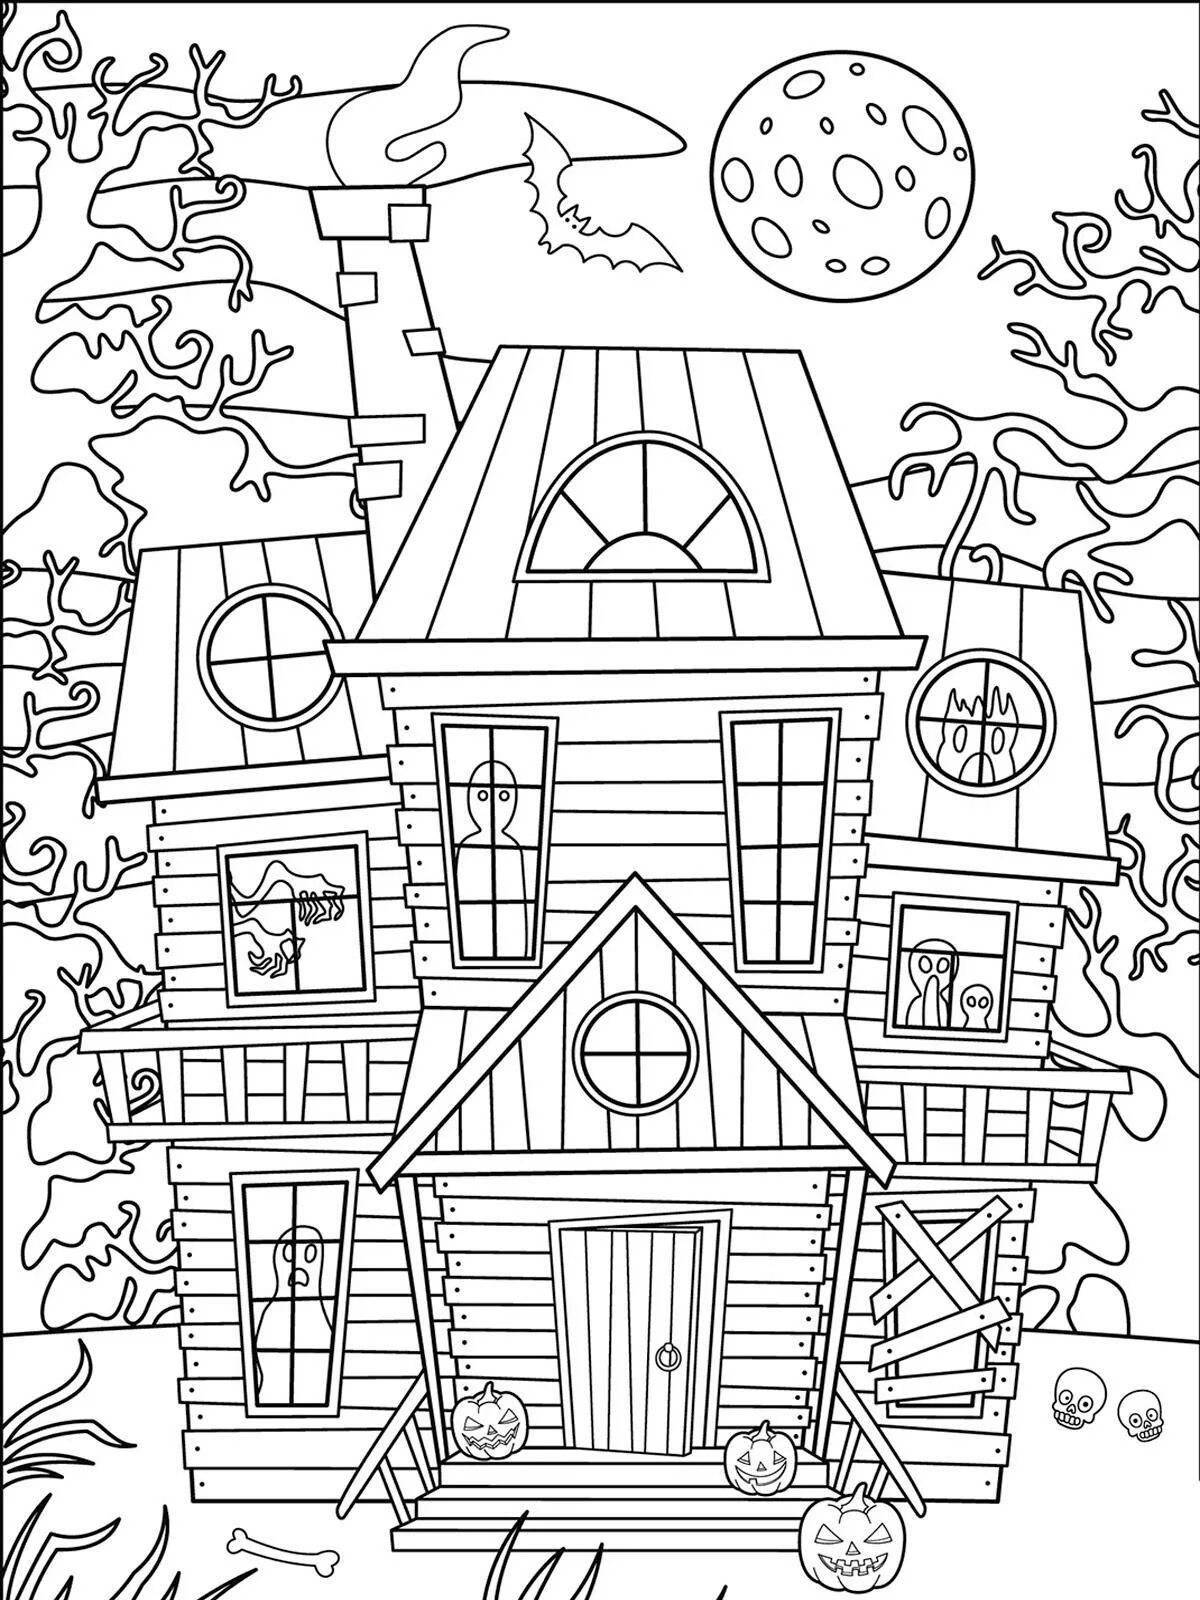 Abandoned haunted house coloring page